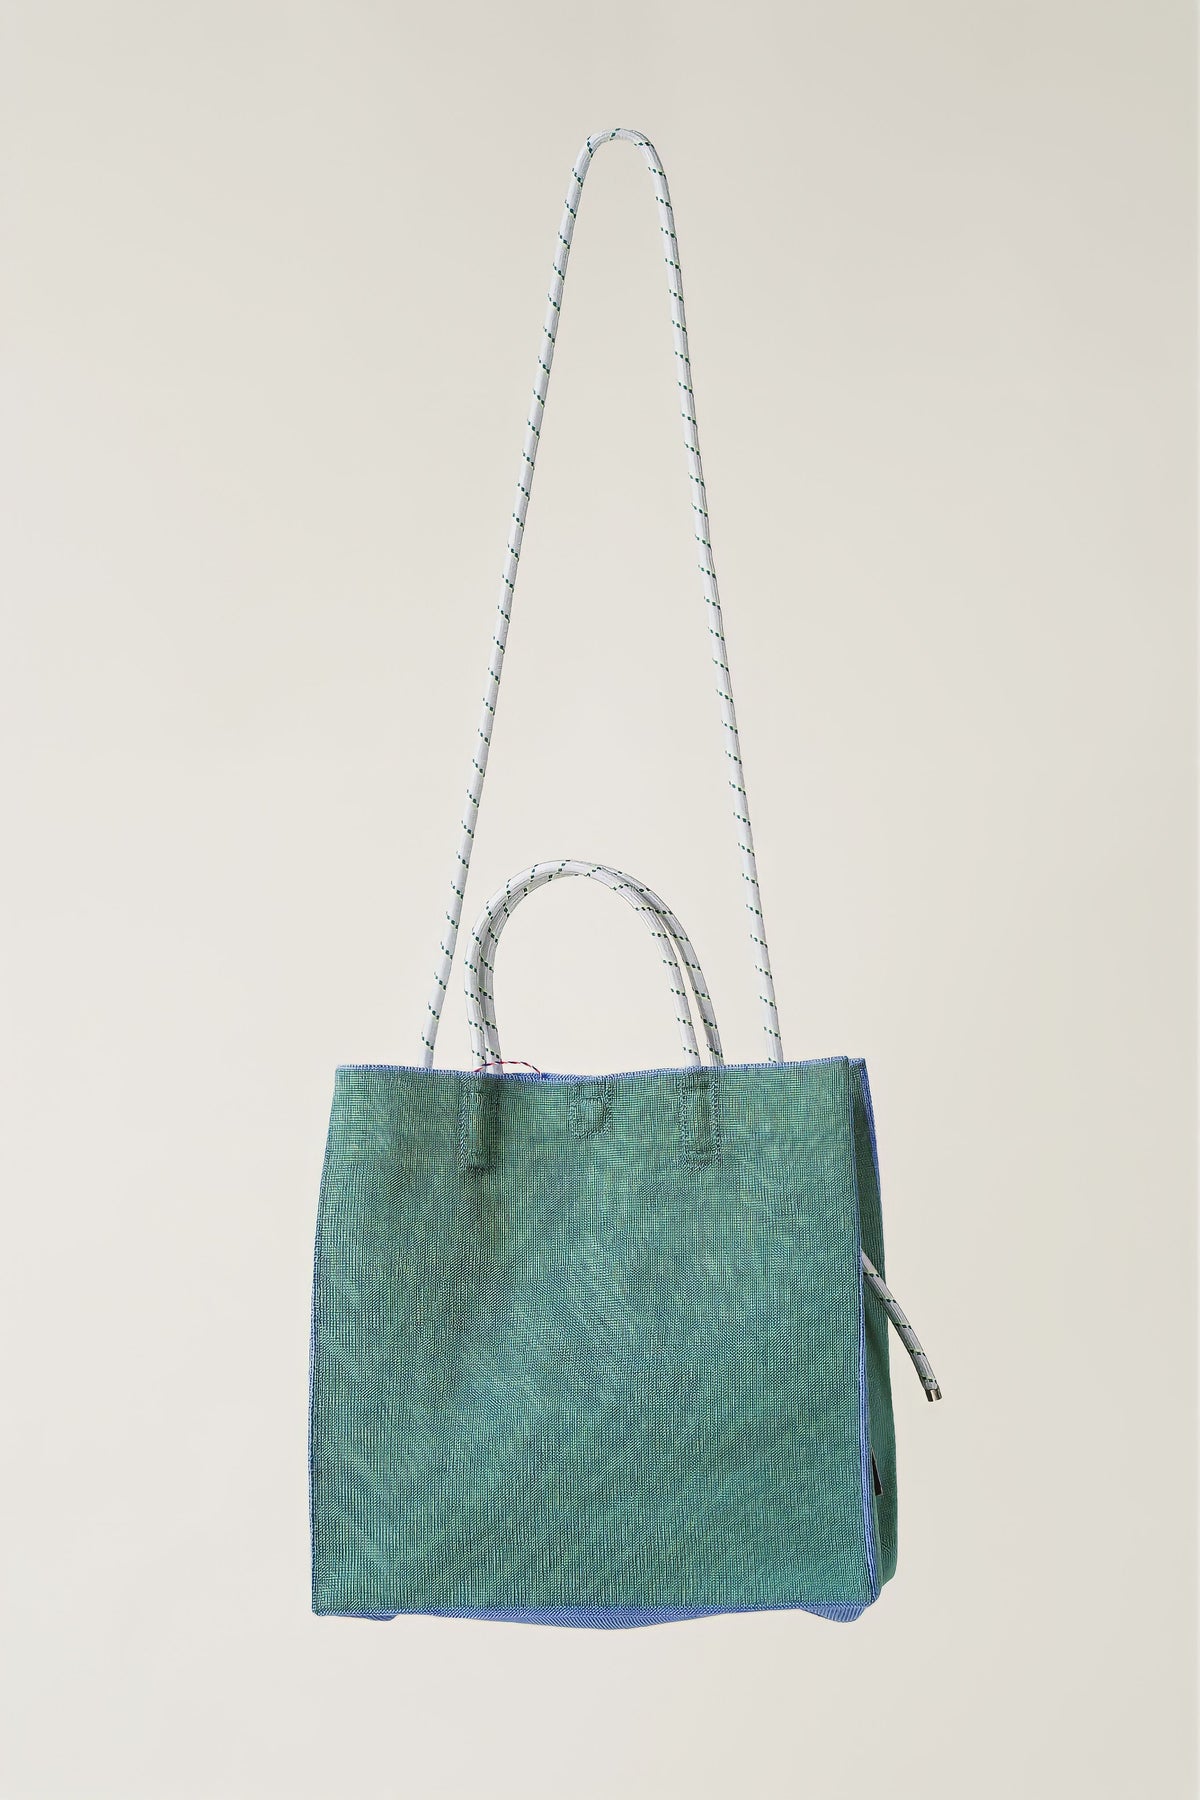 PAPER KNIT BAG SMALL　GREEN